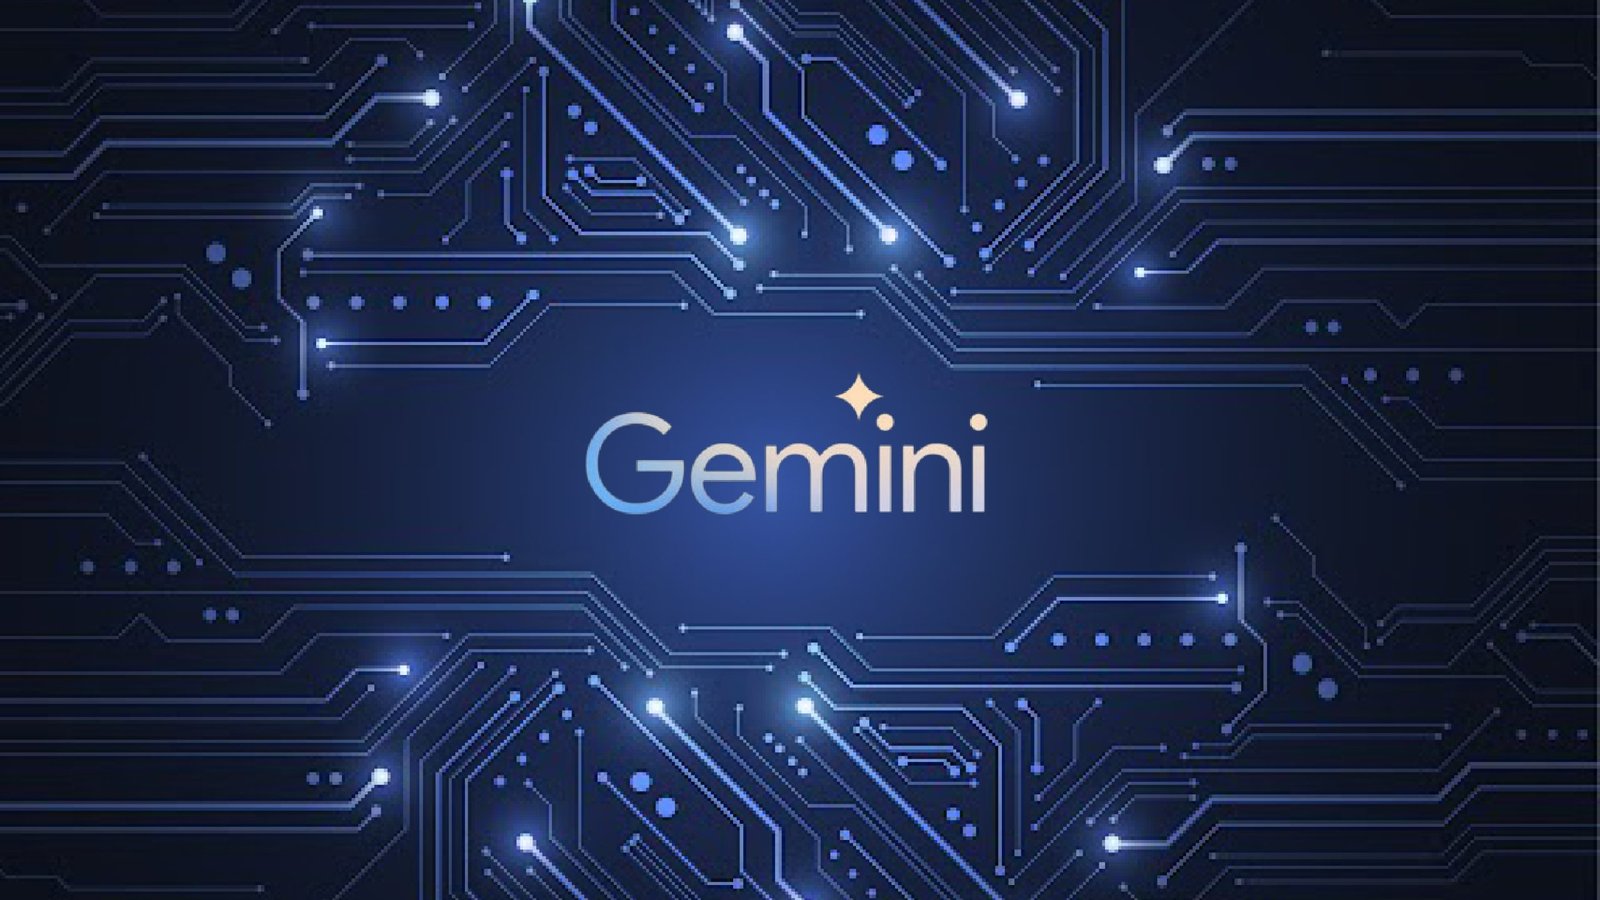 Google Messages Welcomes Gemini AI